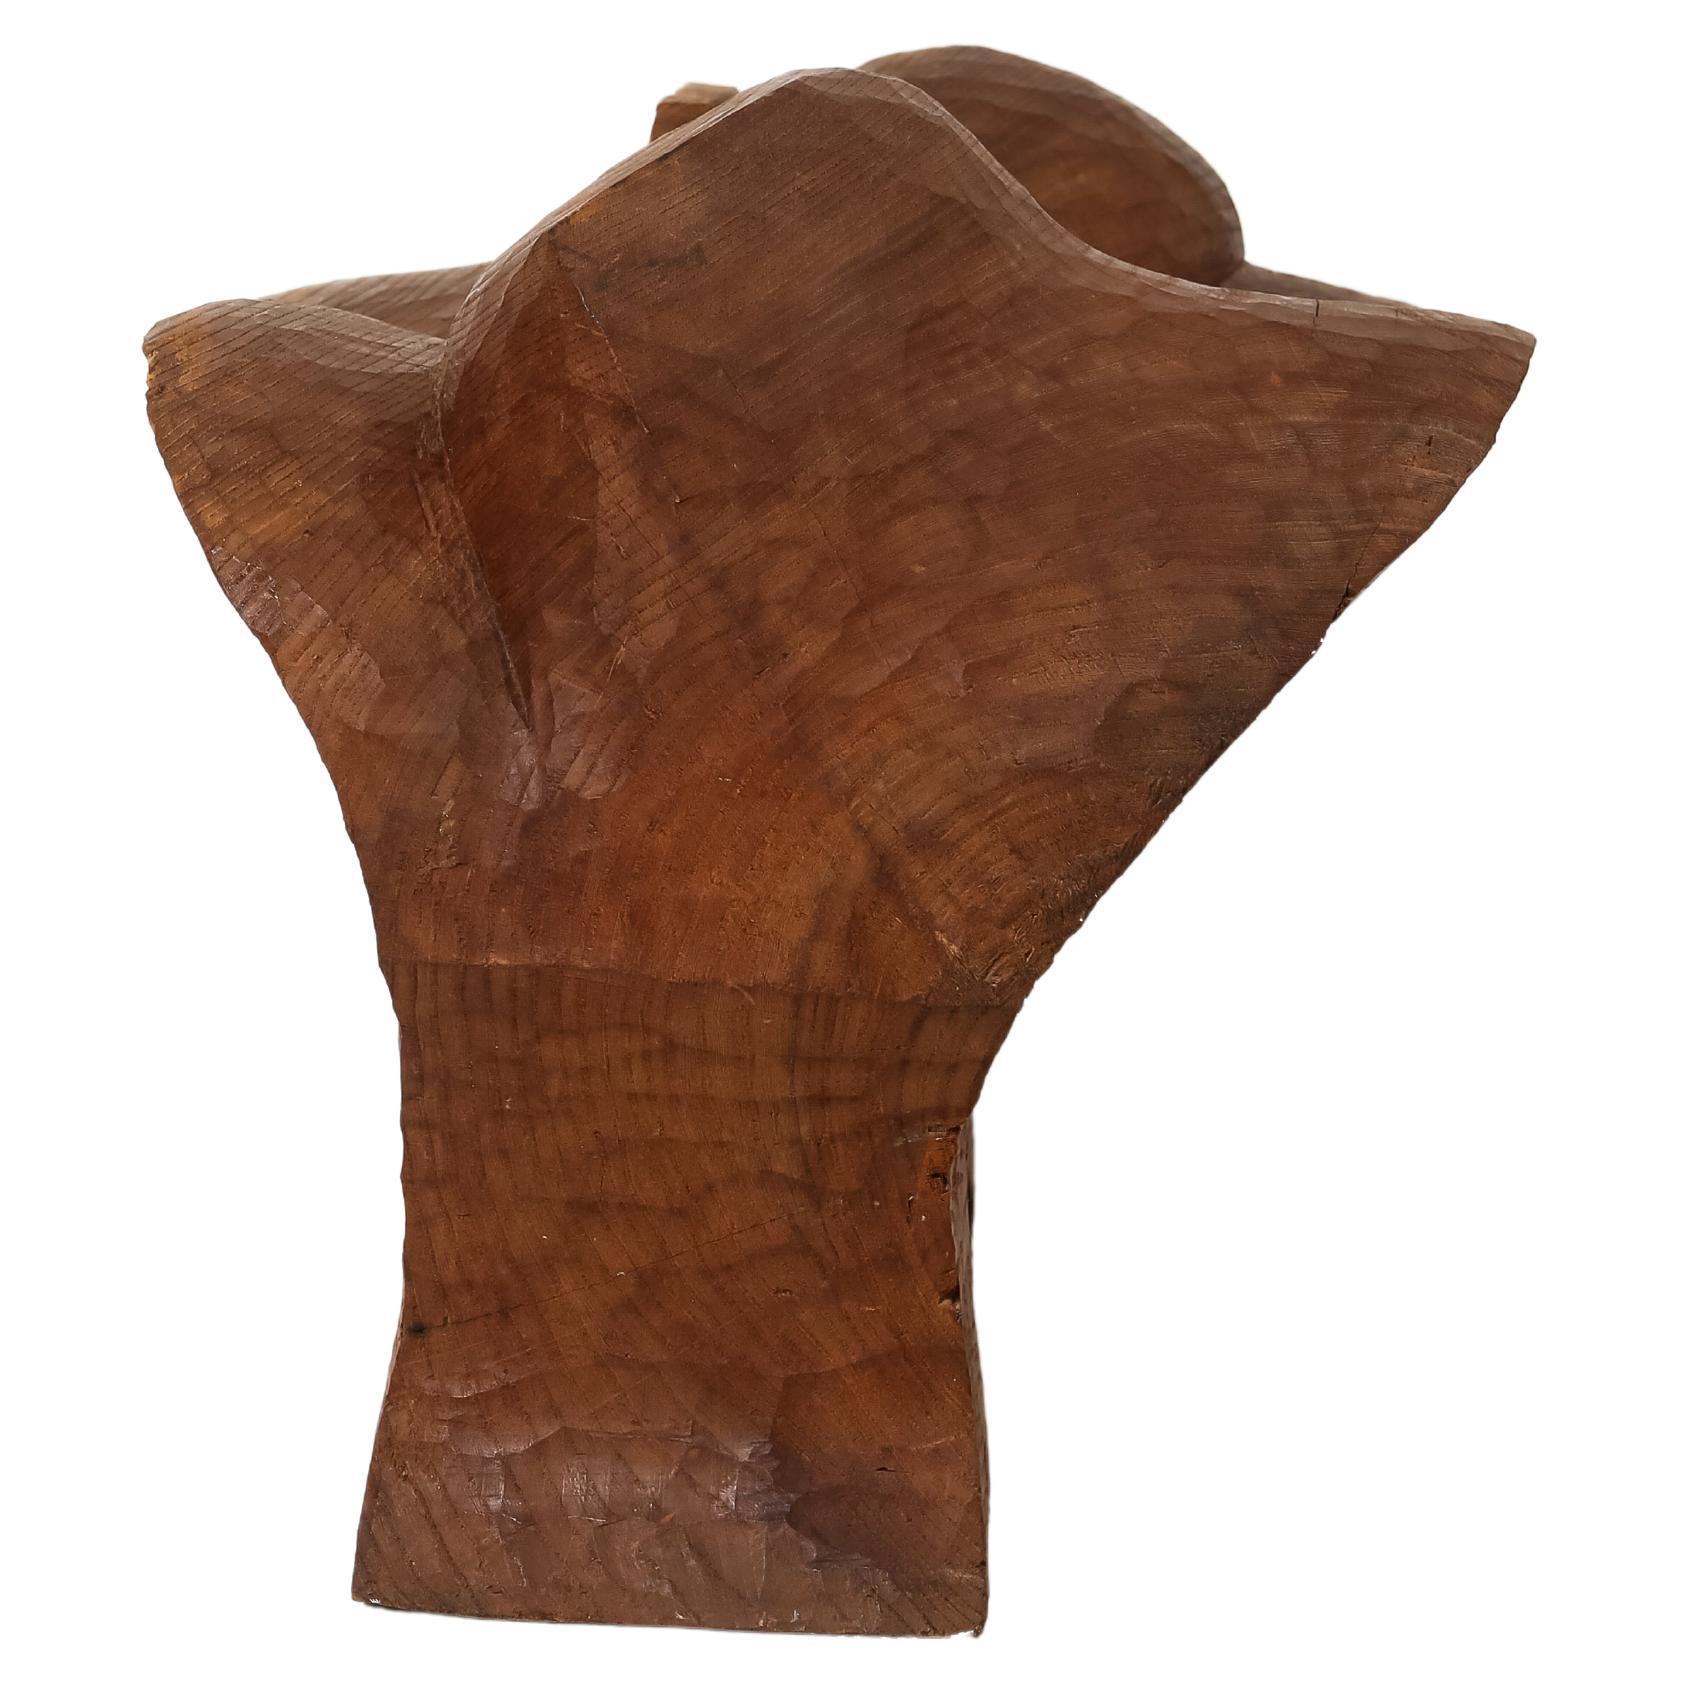 Abstract wood sculpture by Leroy Setziol For Sale